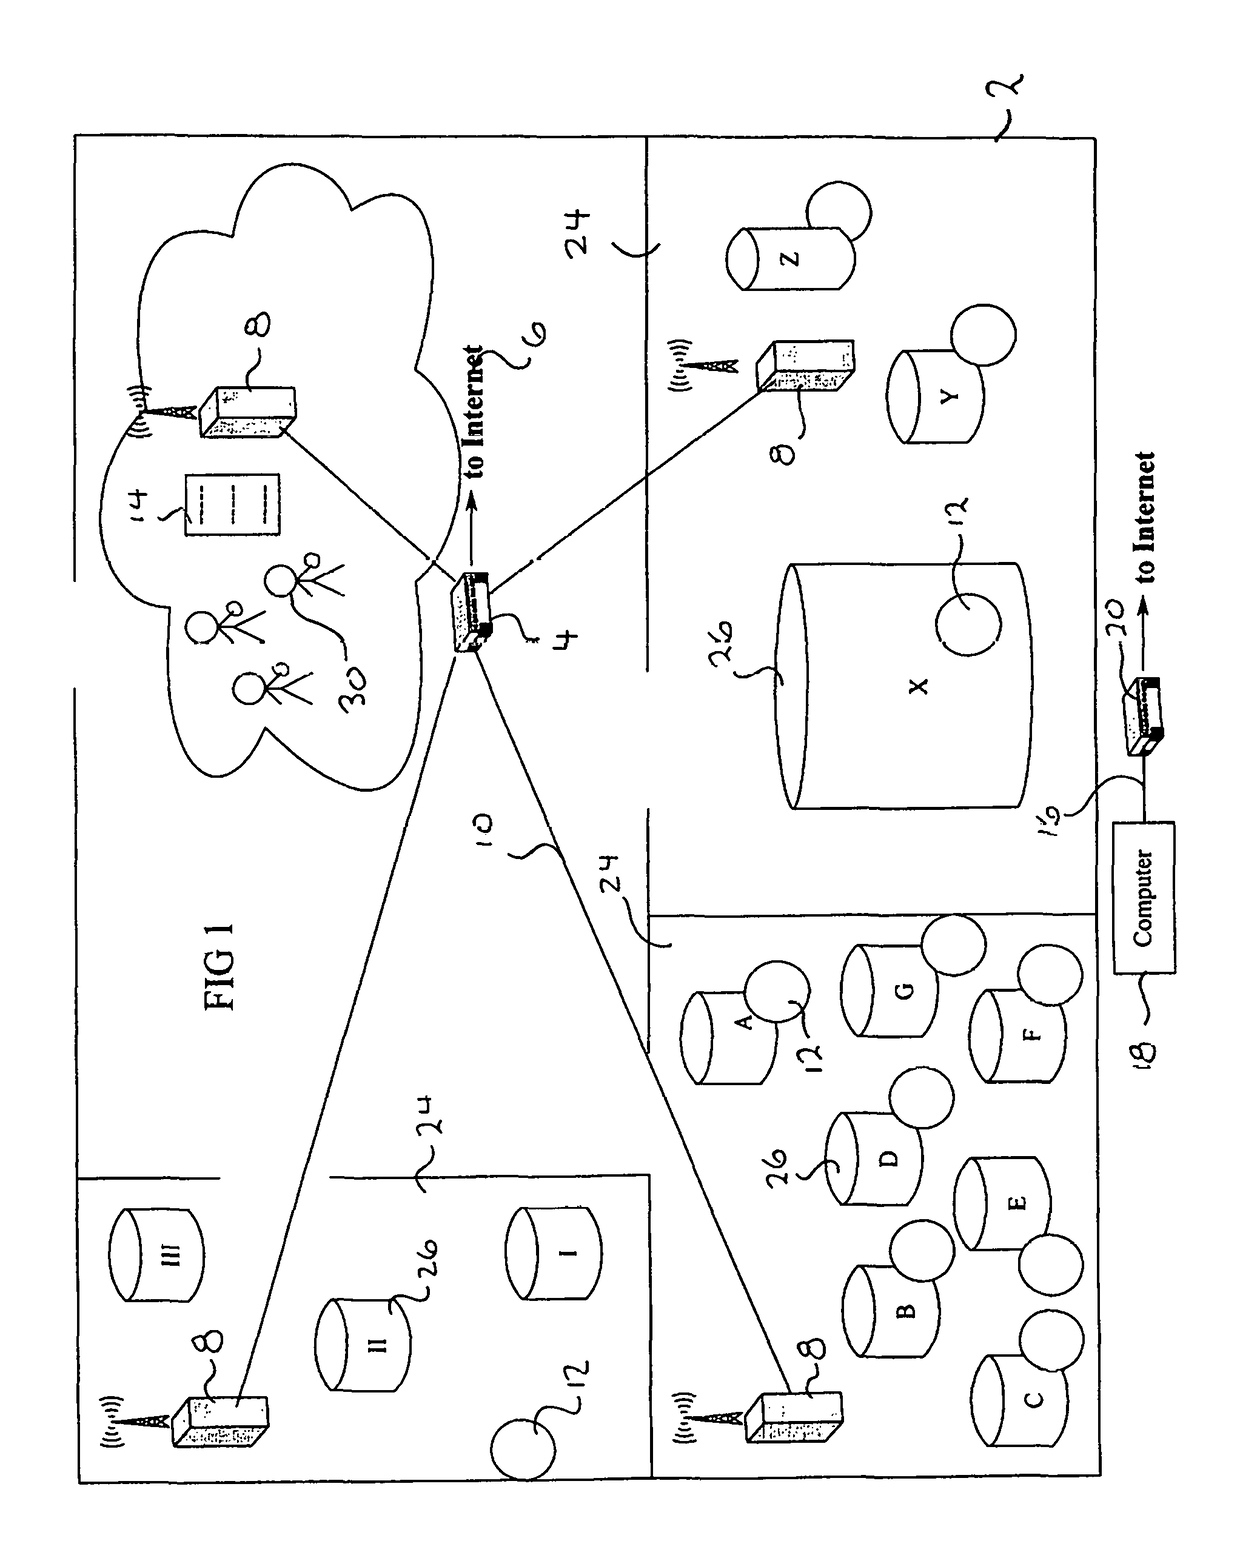 Method and system for localized data retrieval